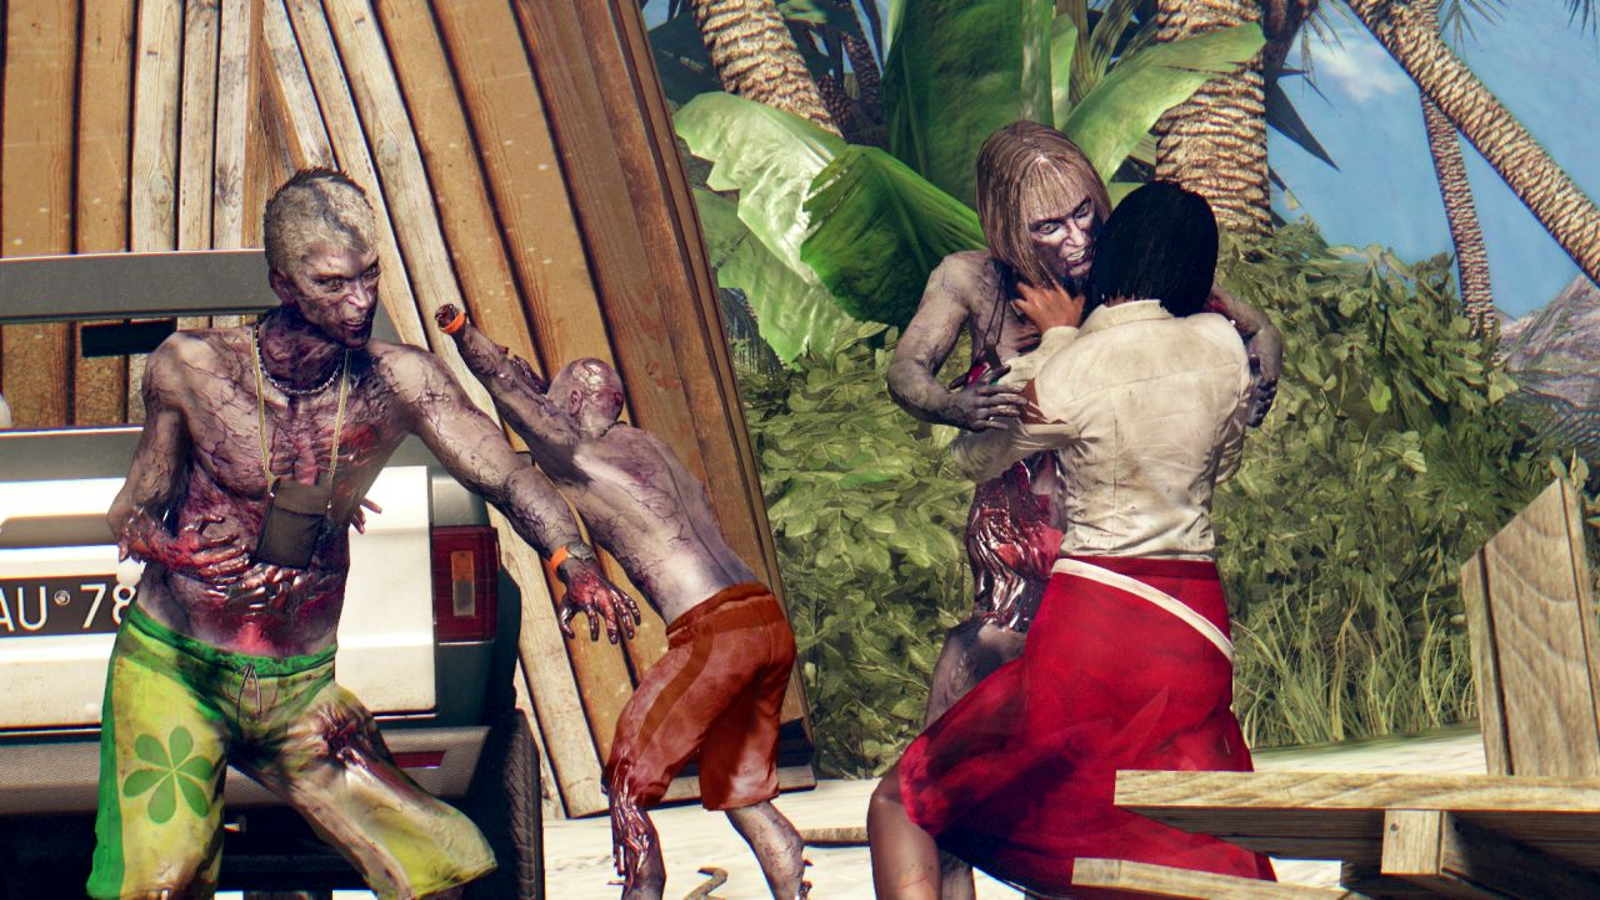 Wait, Dead Island: Riptide Isn't on the Dead Island: Definitive Collection  PS4 Disc?